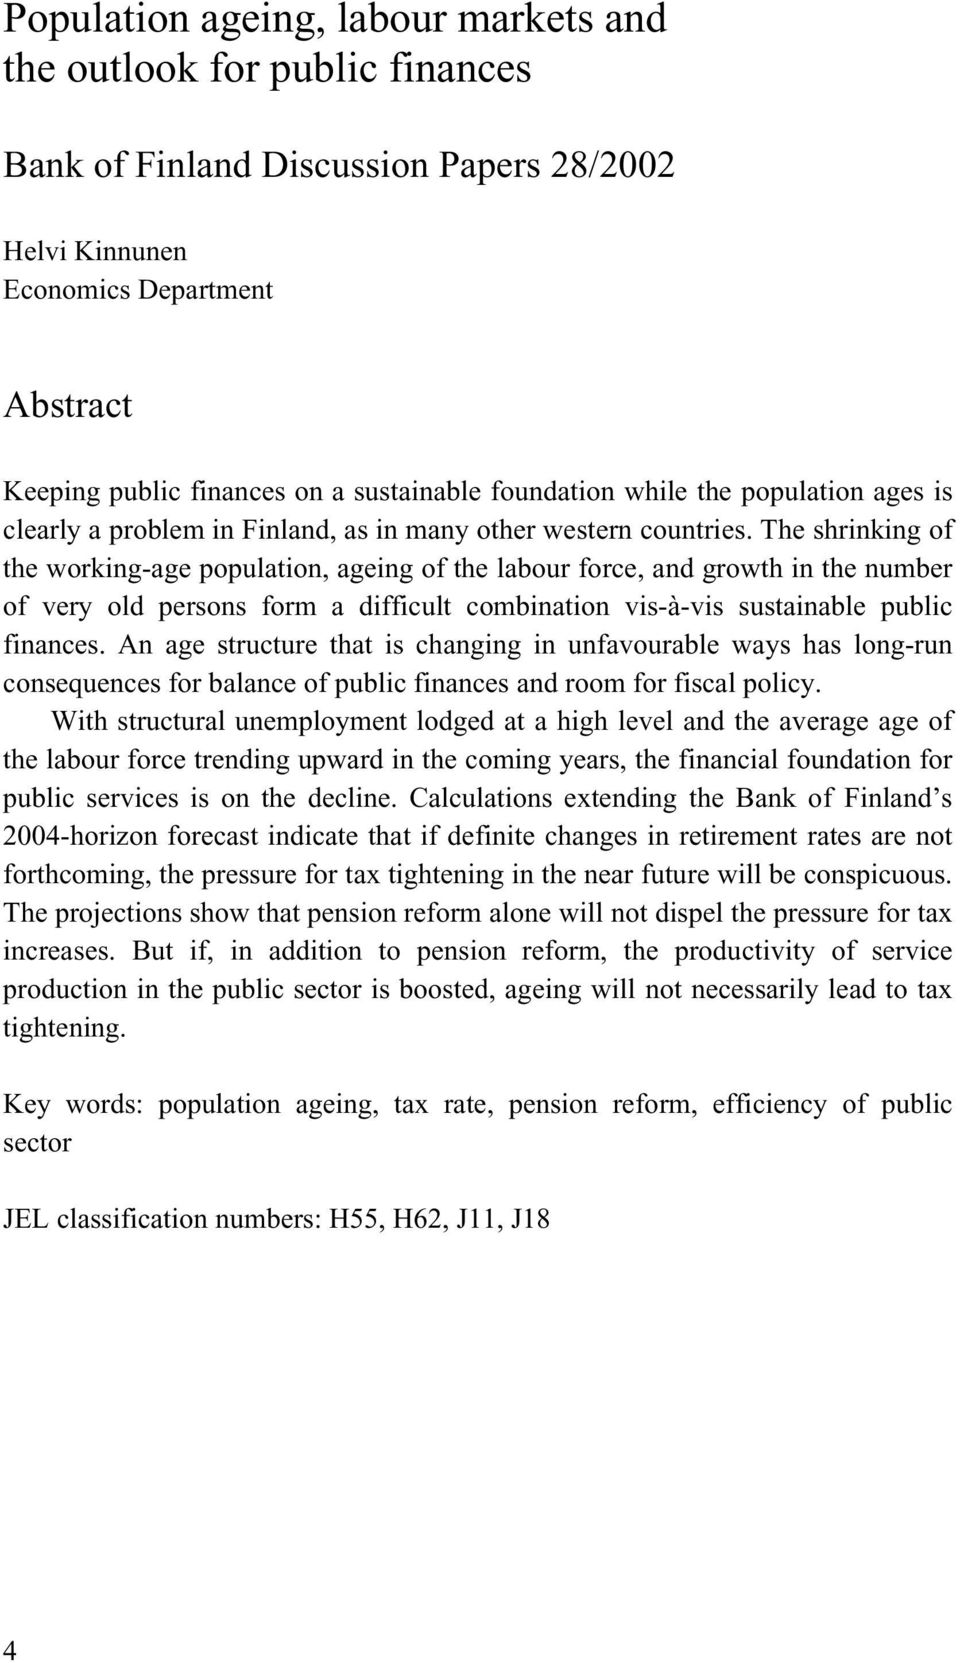 The shrinking of the working-age population, ageing of the labour force, and growth in the number of very old persons form a difficult combination vis-à-vis sustainable public finances.